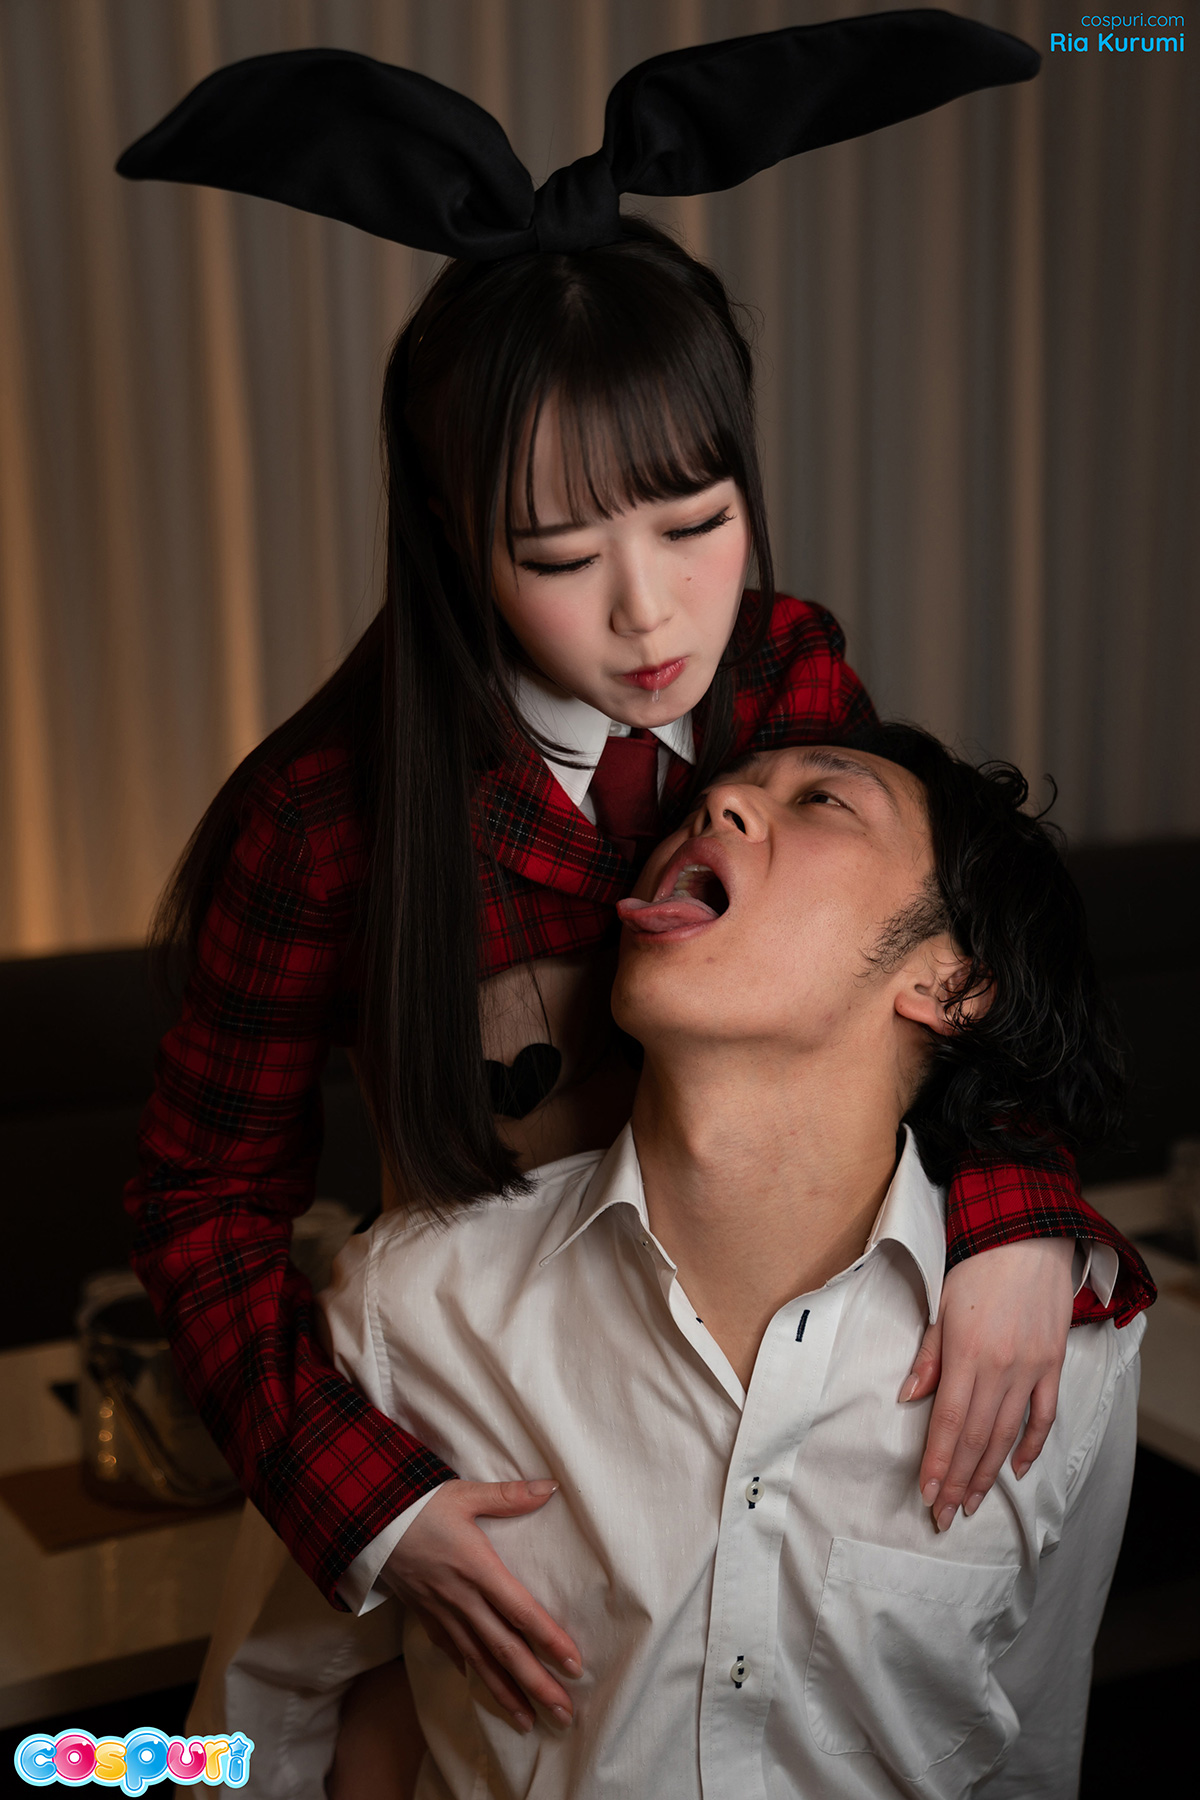 Japanese girl Ria Kurumi has fun with a double-sided dildo and licks her boyfriends anus A amazing Japanese site to search the best in sex along the hottest top japan woman